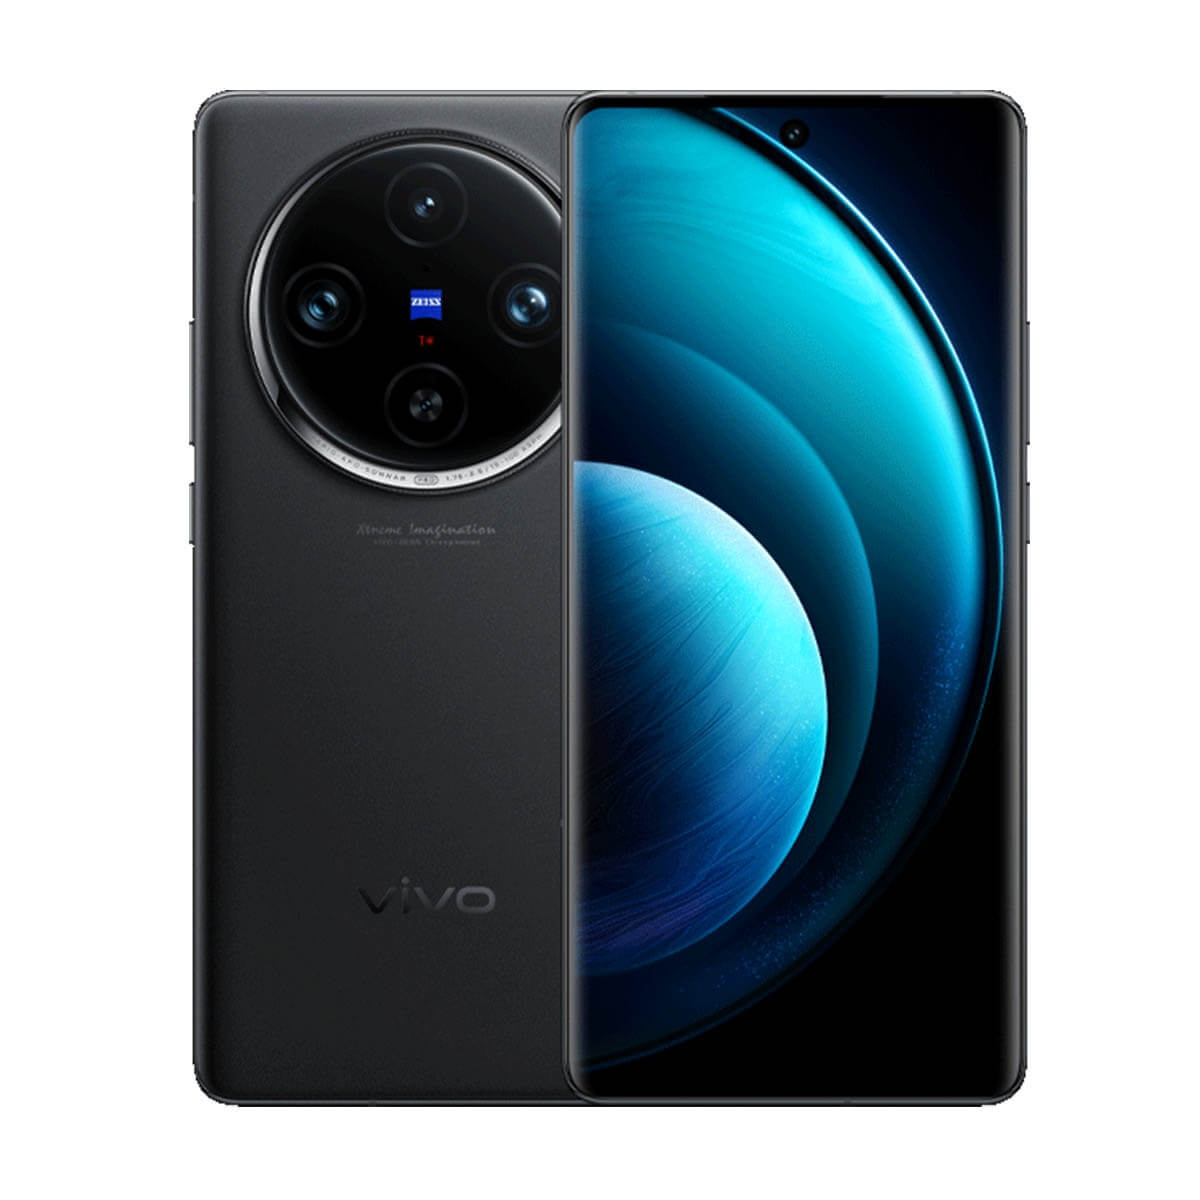 Don't Miss Out: Order Vivo X100 5G for Online Discounts!